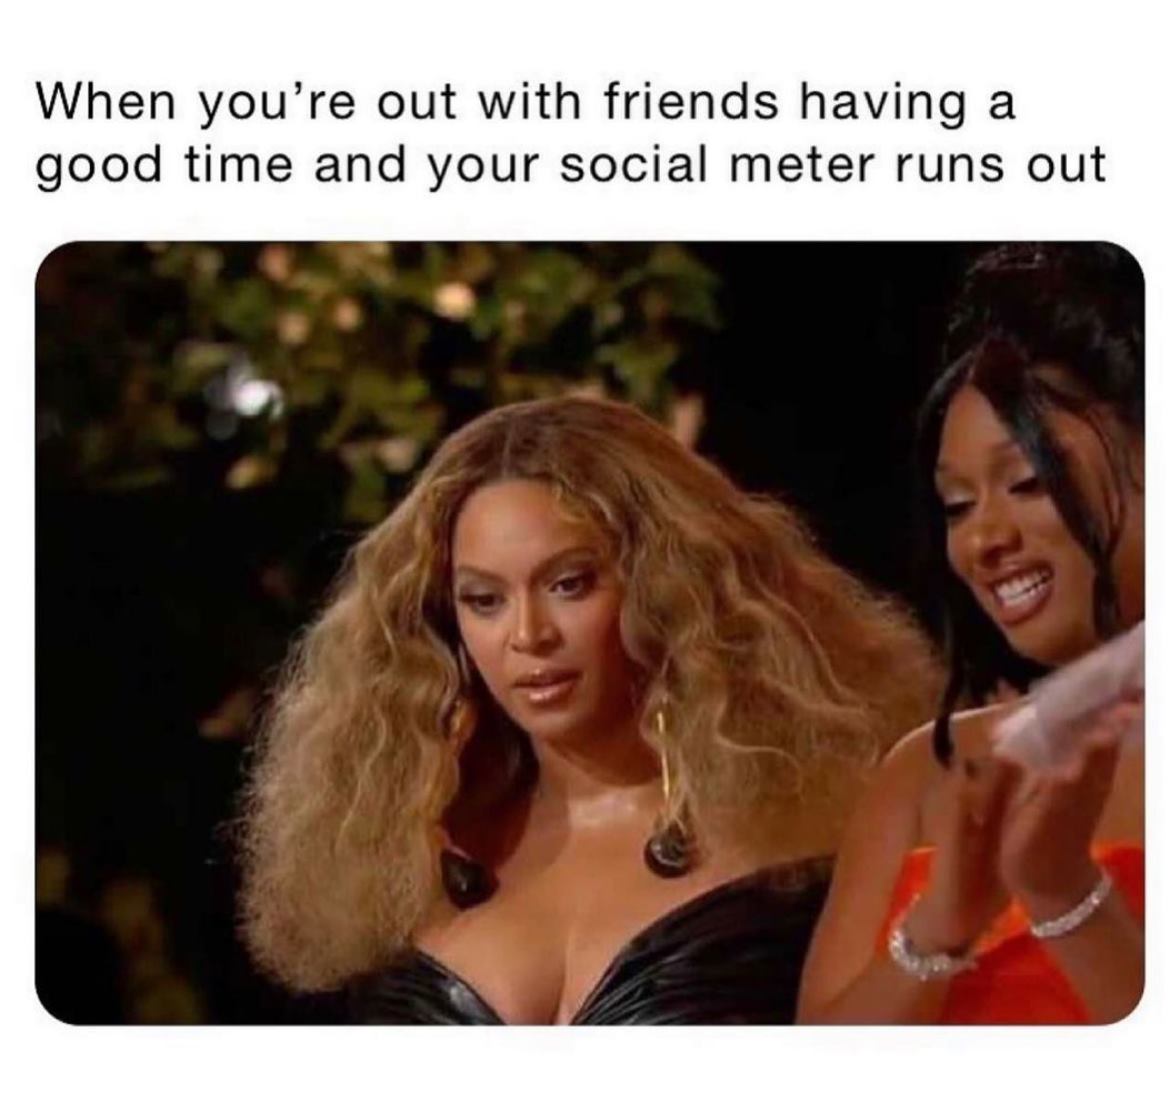 social meter meme - When you're out with friends having a good time and your social meter runs out